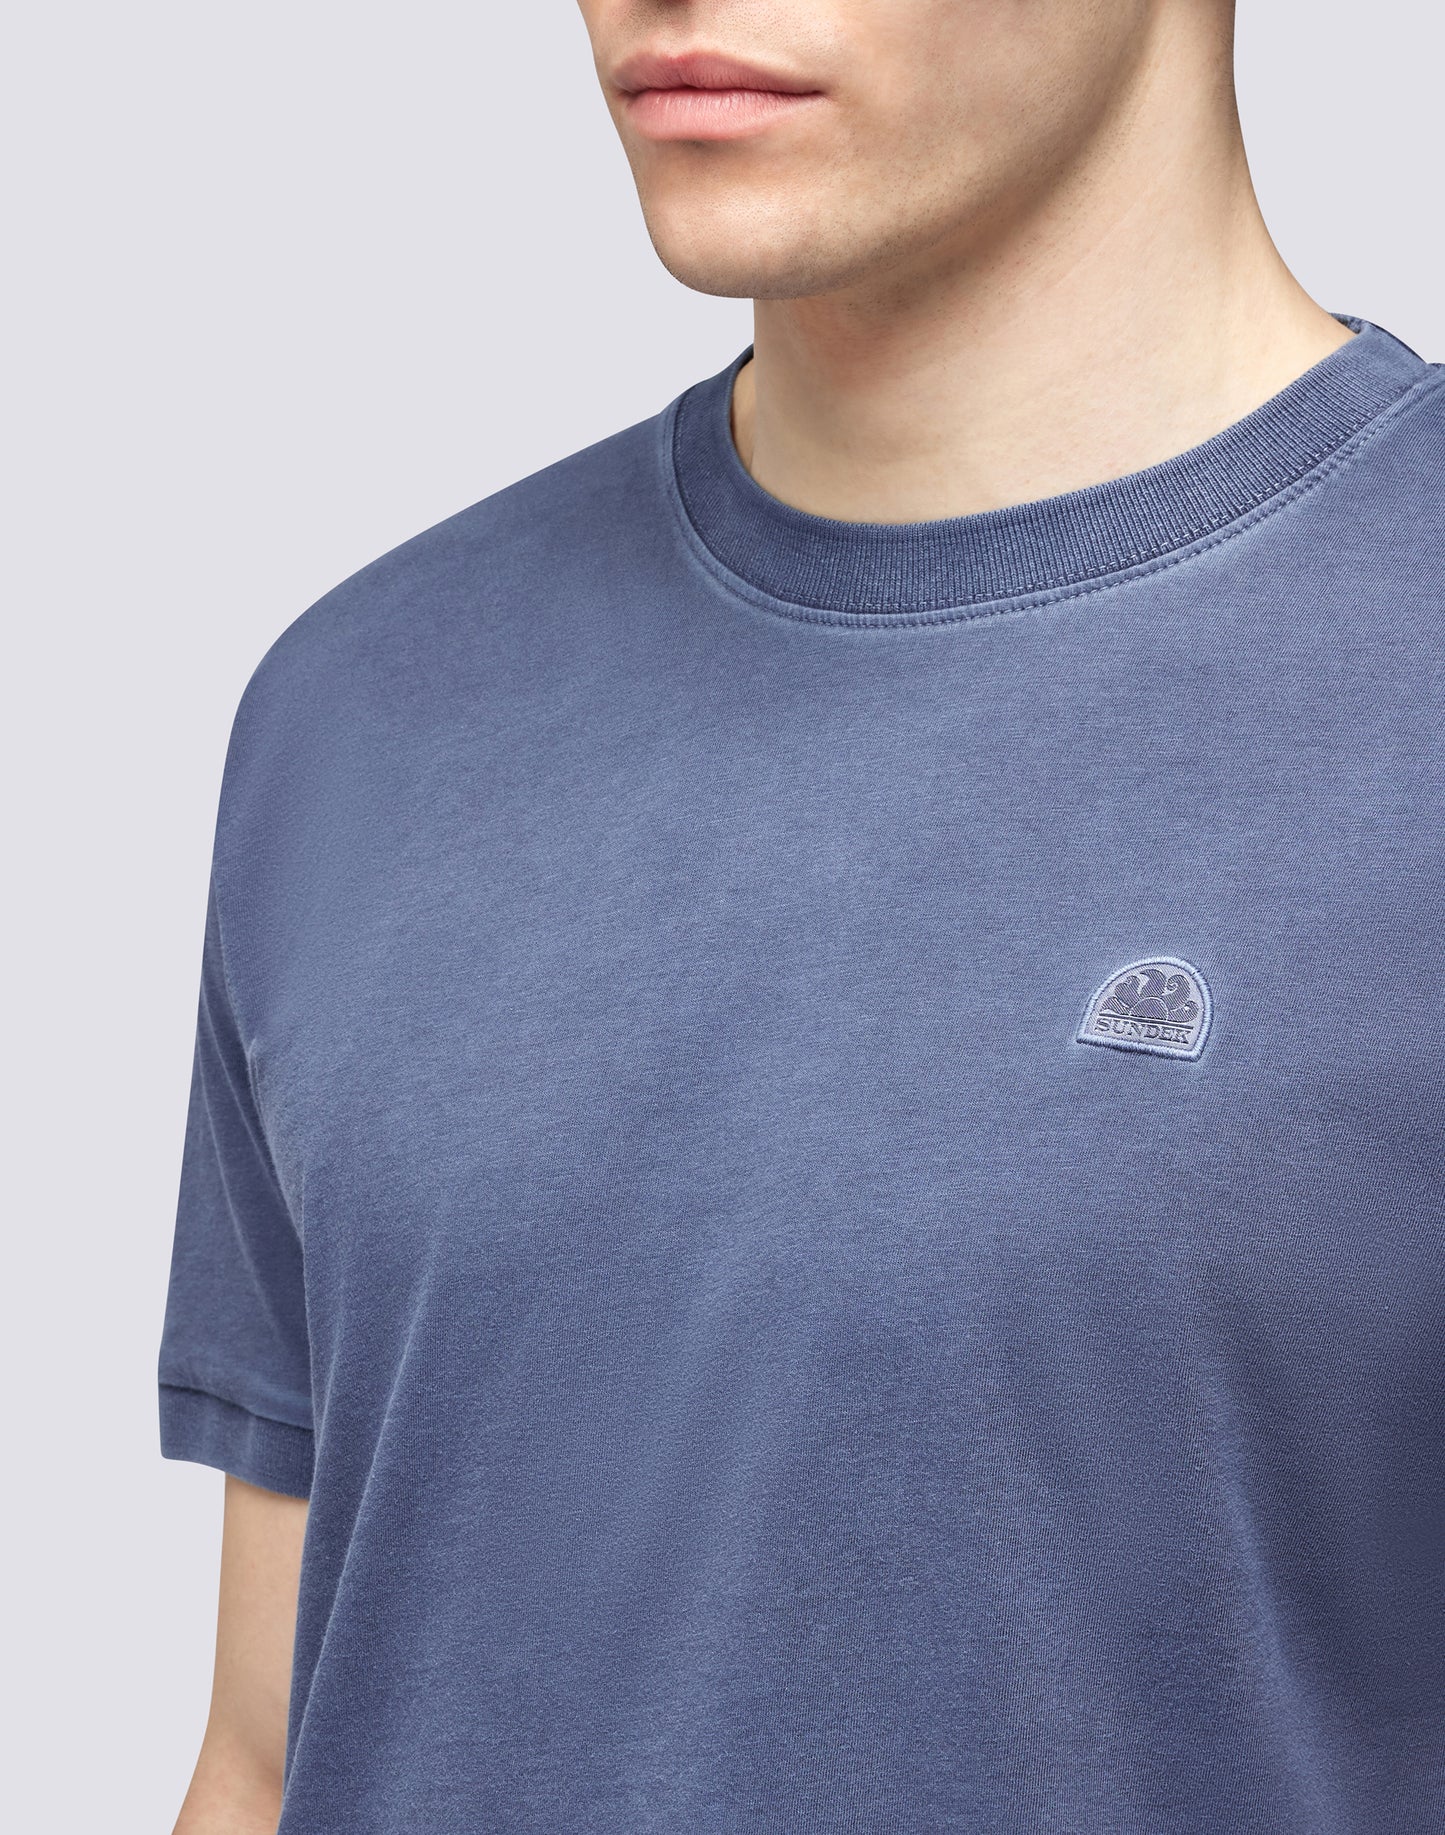 NEW DEY GARMENT DYED CREW NECK T-SHIRT WITH LOGO